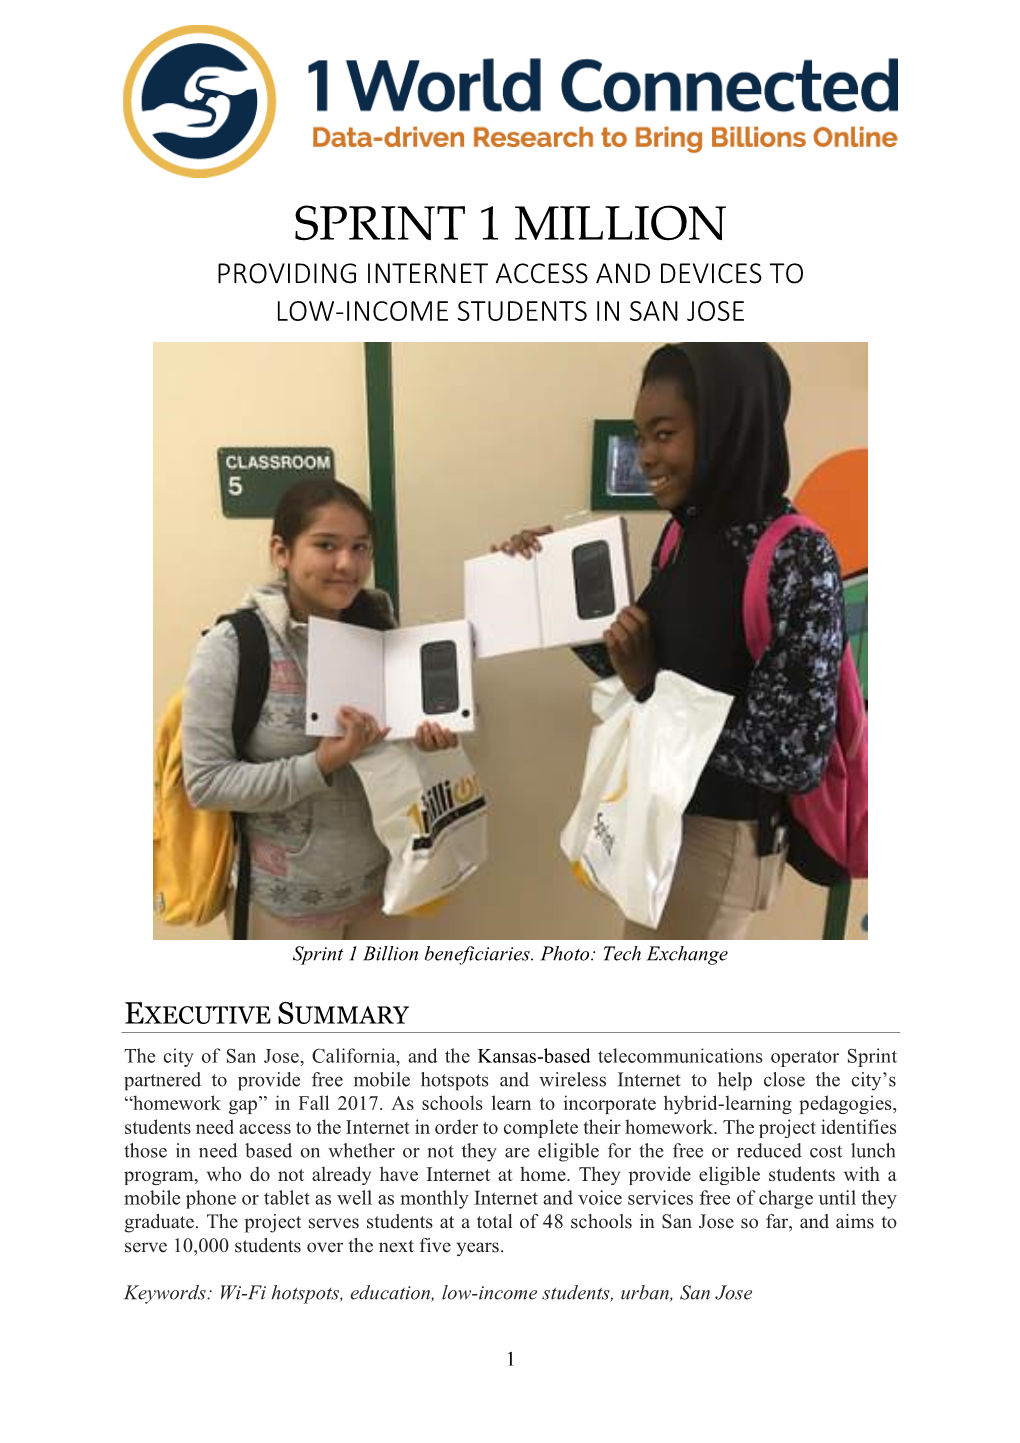 Sprint 1 Million Providing Internet Access and Devices to Low-Income Students in San Jose